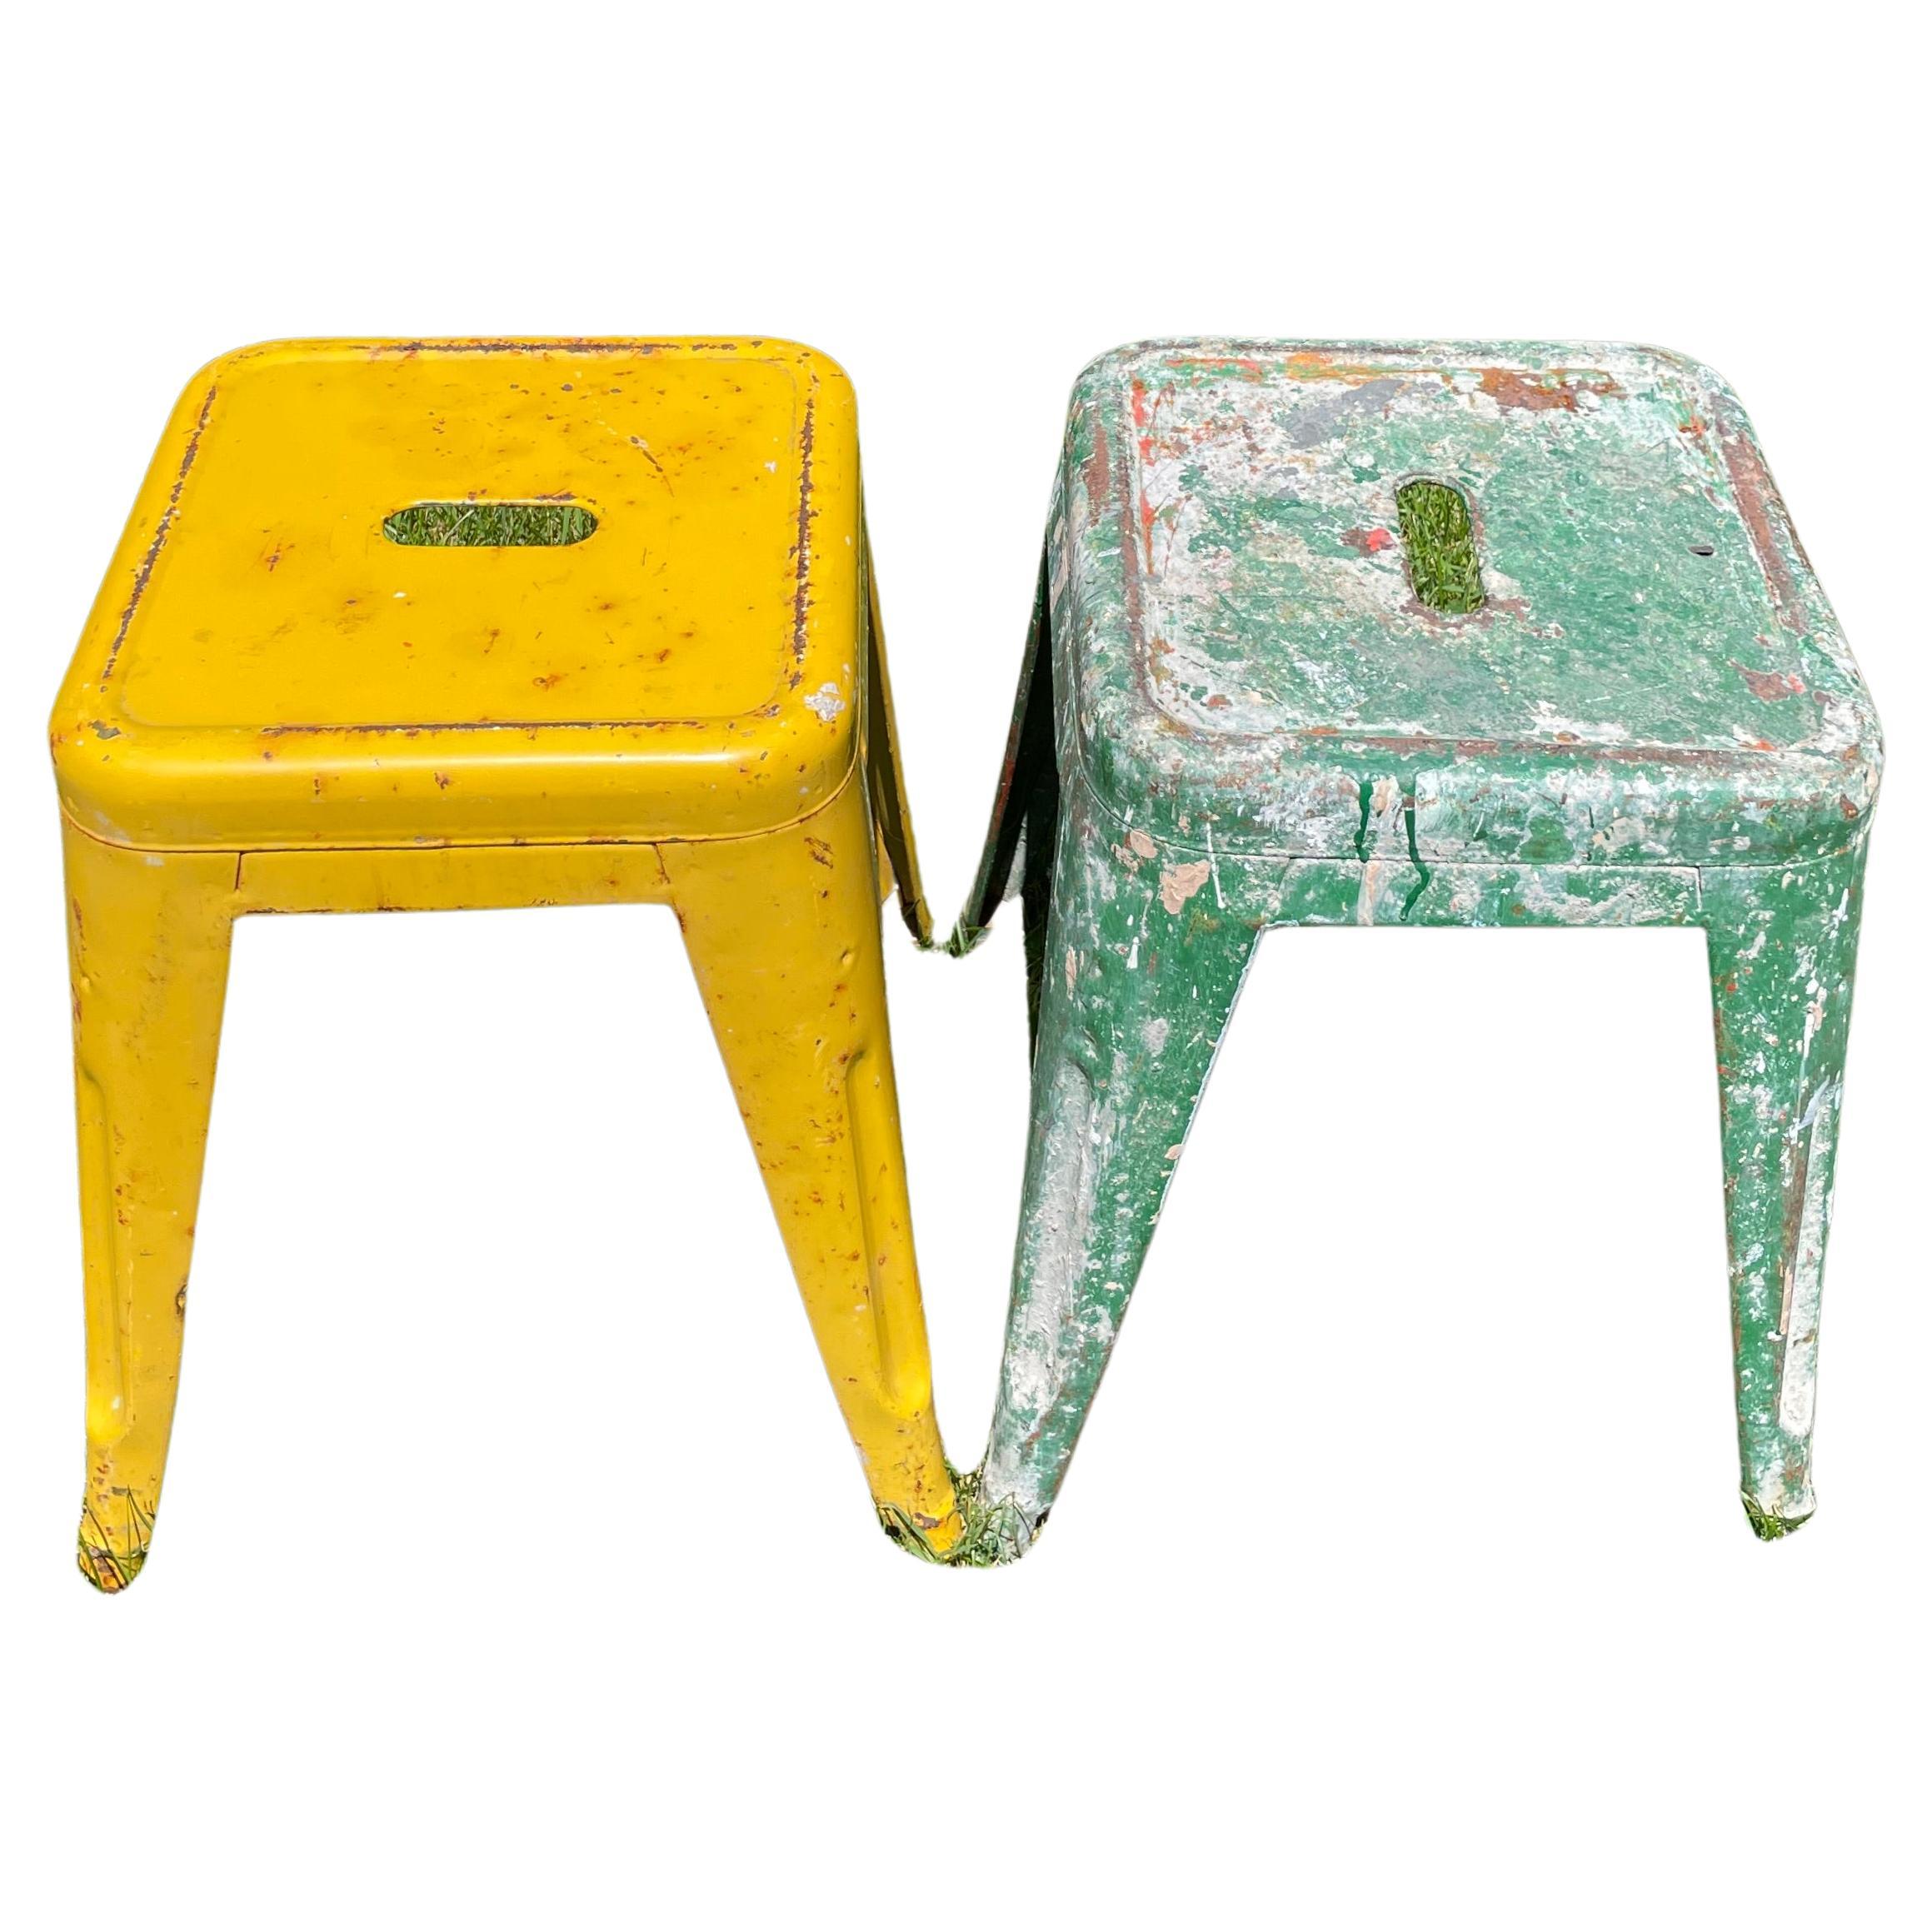 Two Authentic French Vintage "Tabouret H" Stools by Tolix